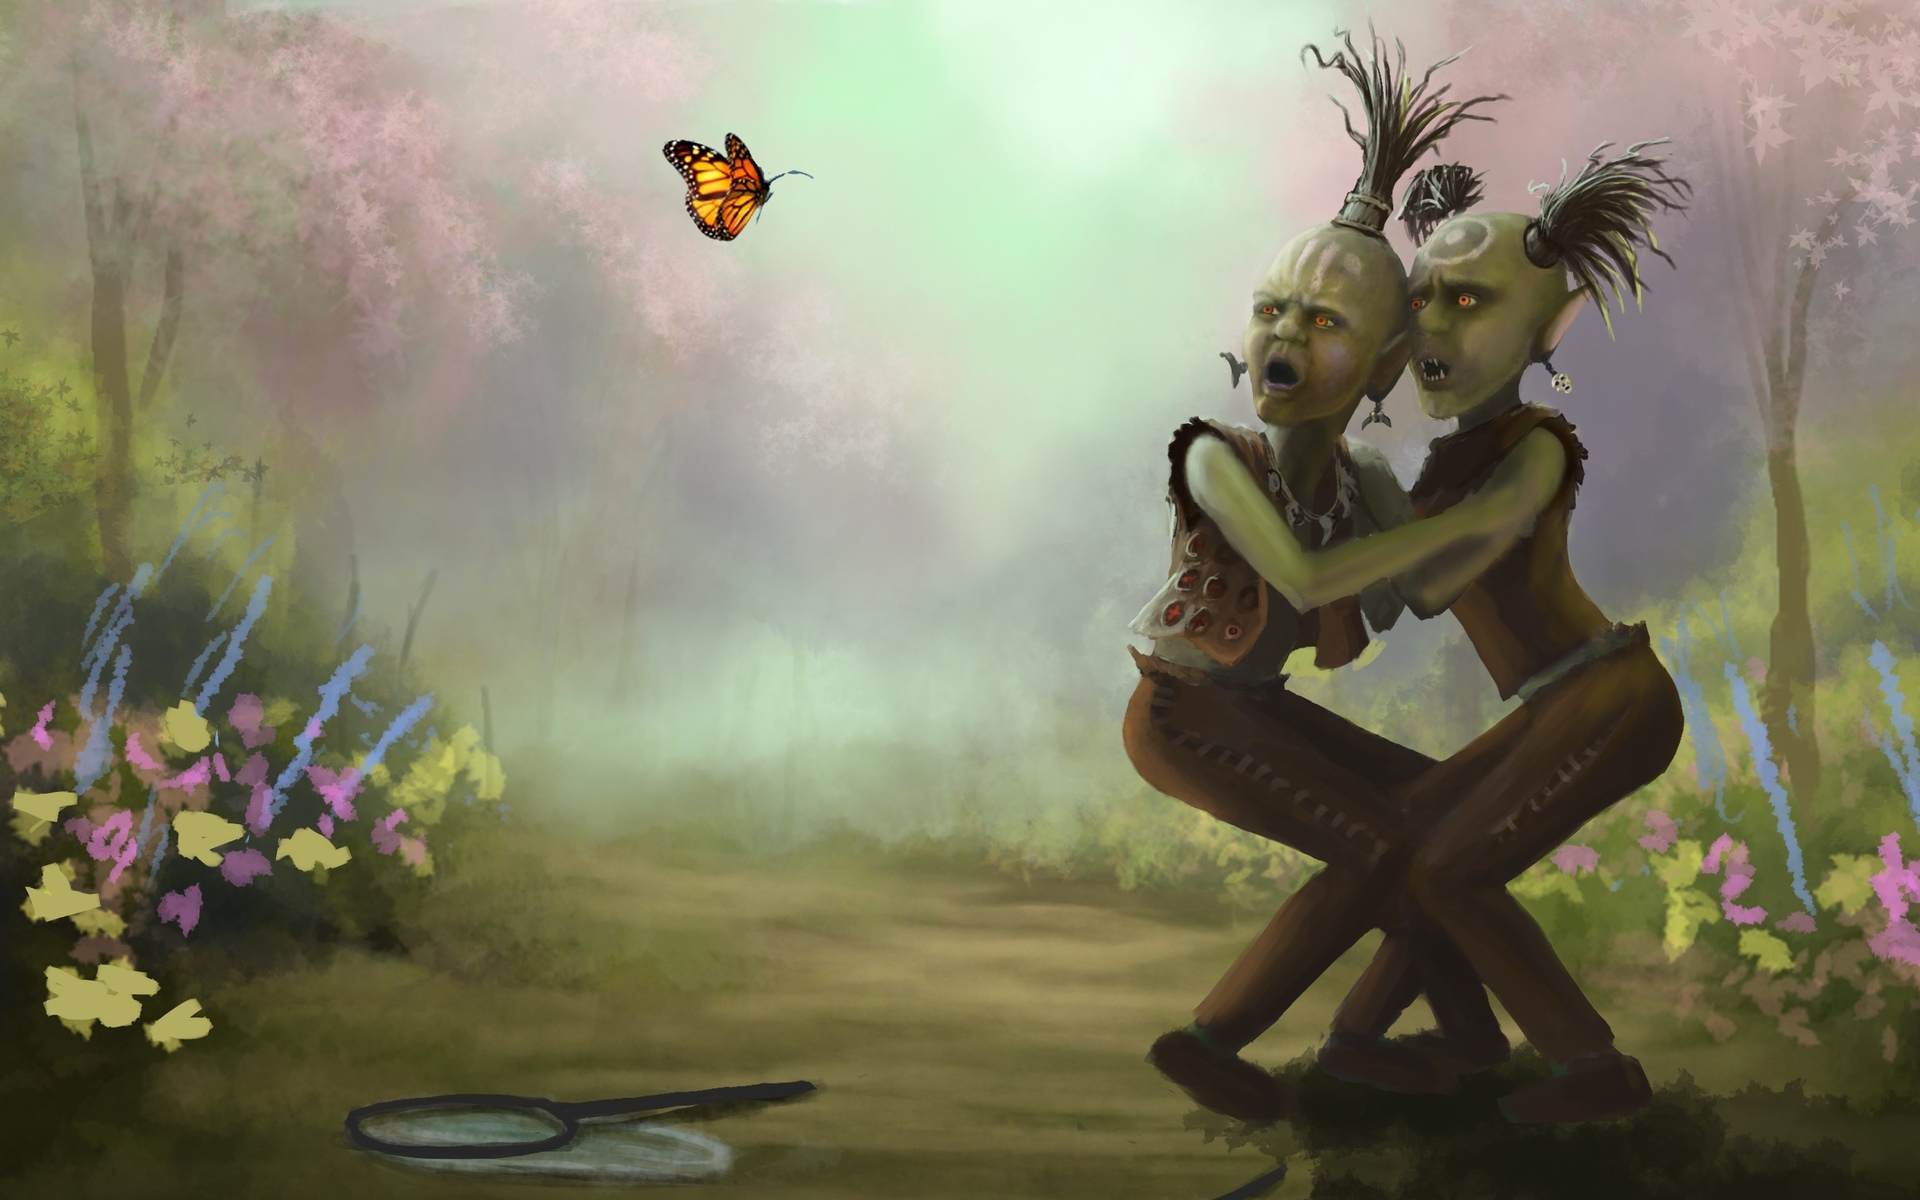 fantasy, Art, Monsters, Creatures, Butterfly, Scary, Creepy, Spooky, Humor, Insect, Nature, Flowers Wallpaper